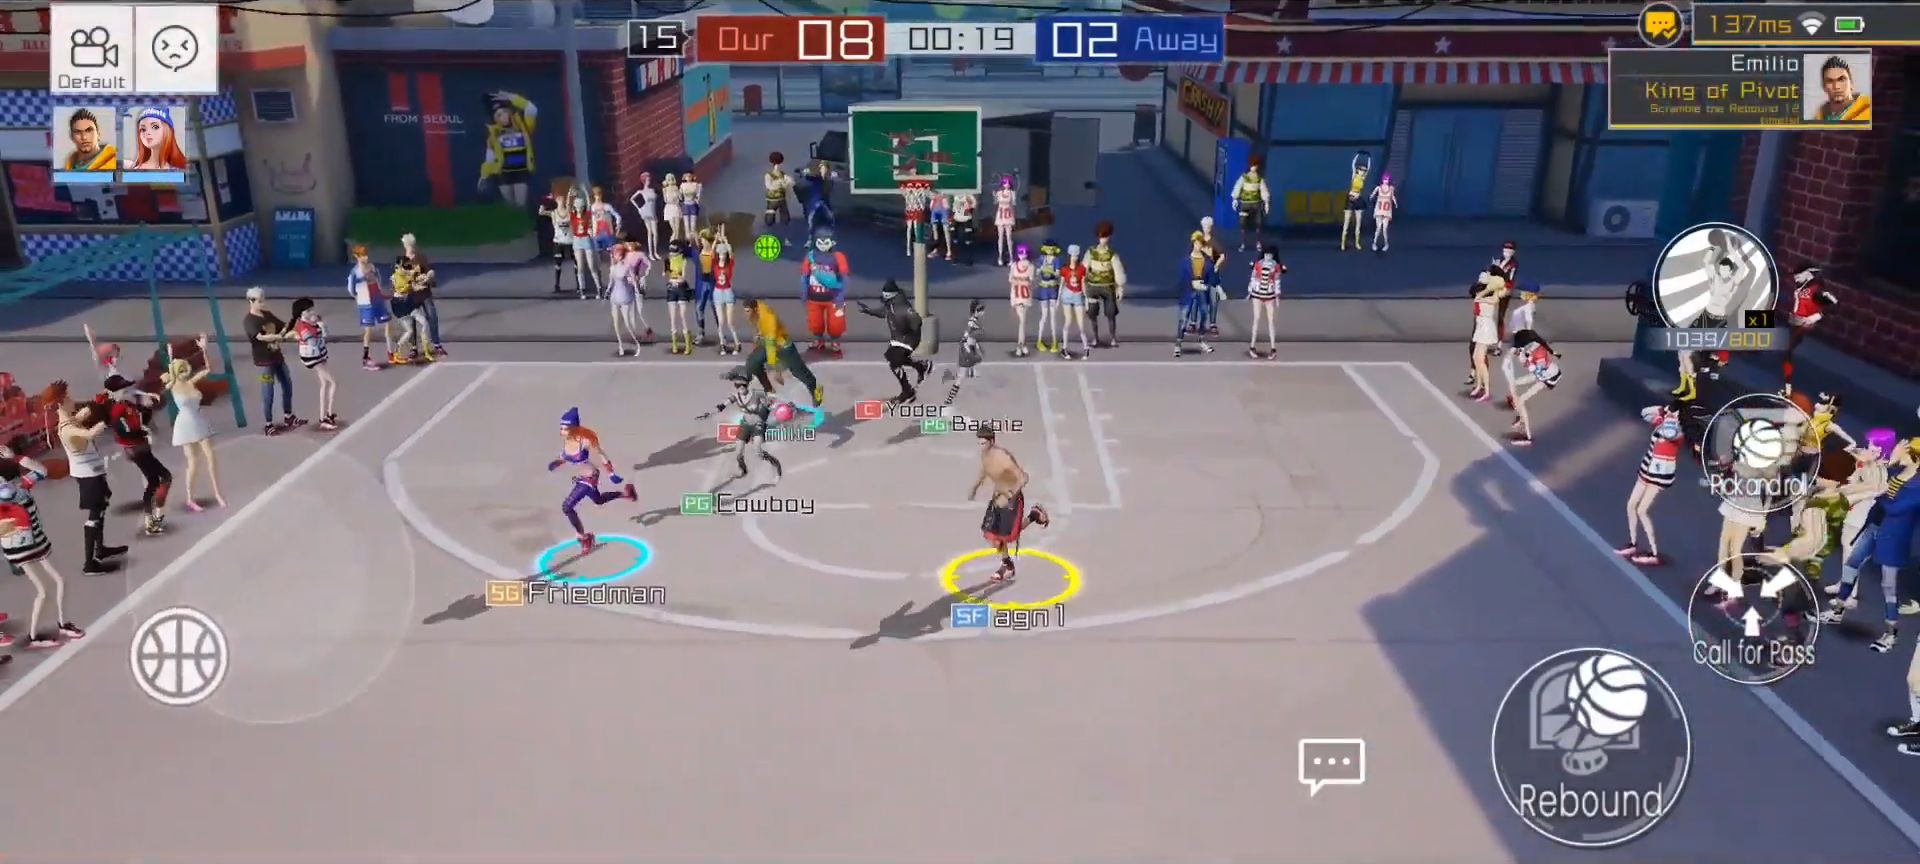 Download Streetball2: On Fire Android free game.